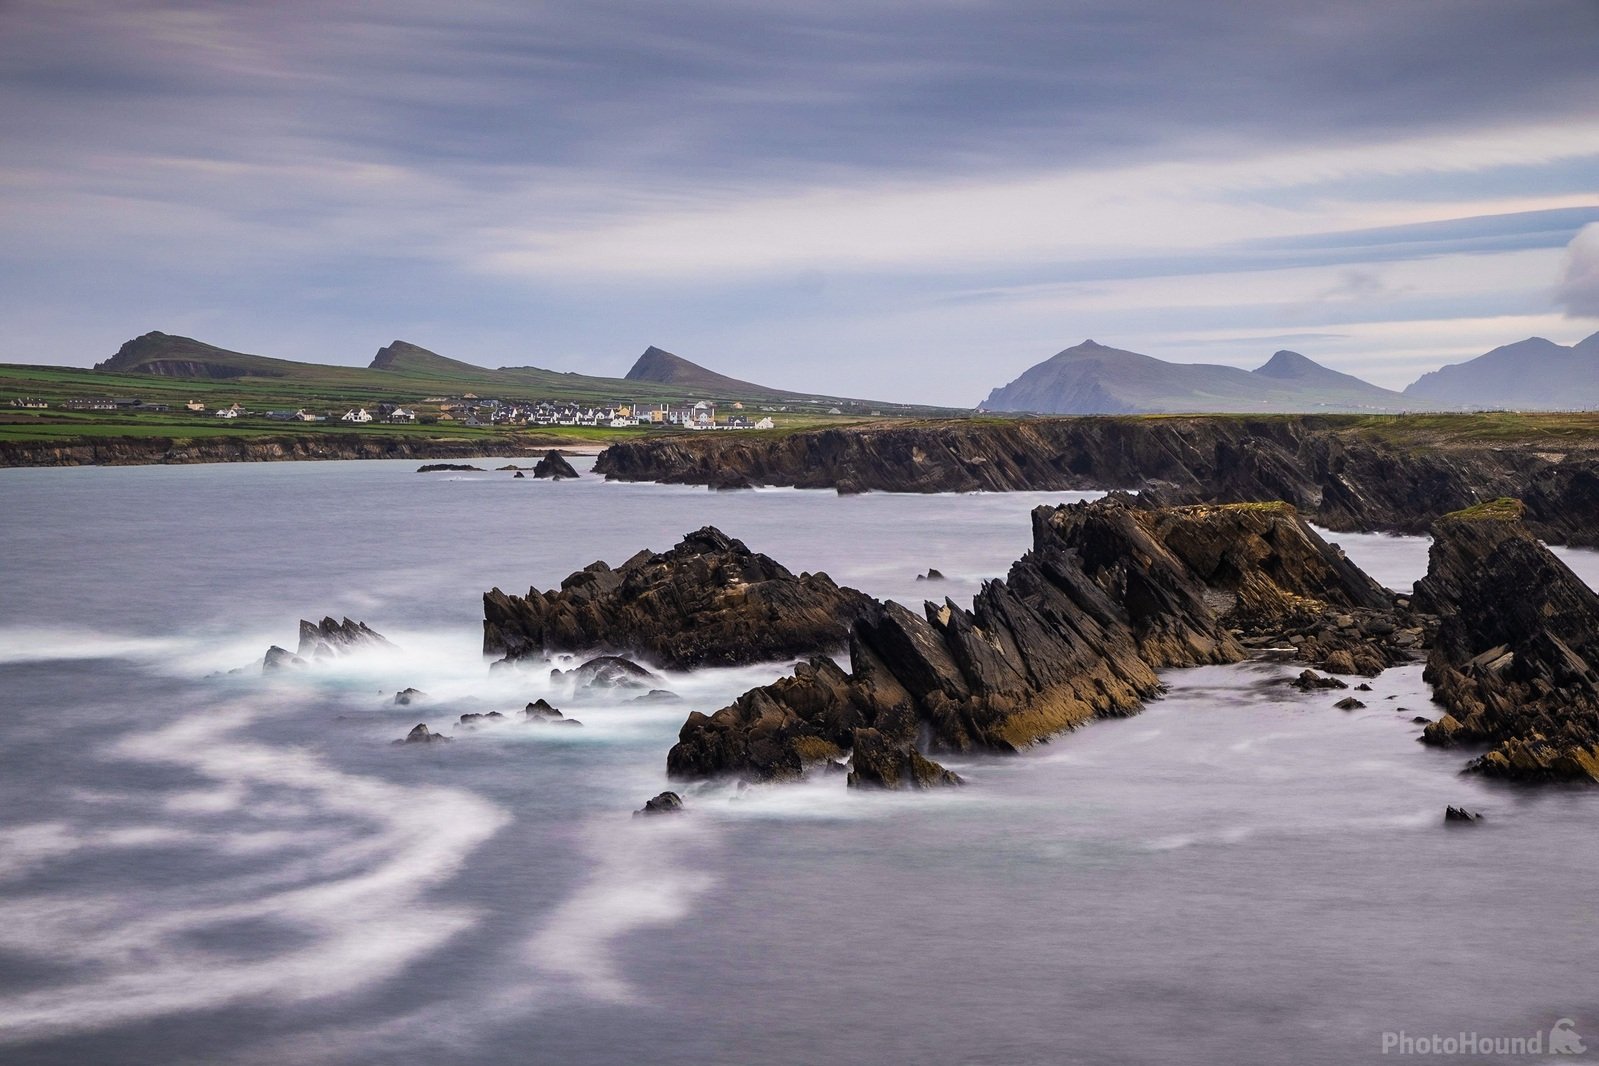 Image of Ferriters Cove on Dingle Peninsula, Ireland by Andreas Marjoram